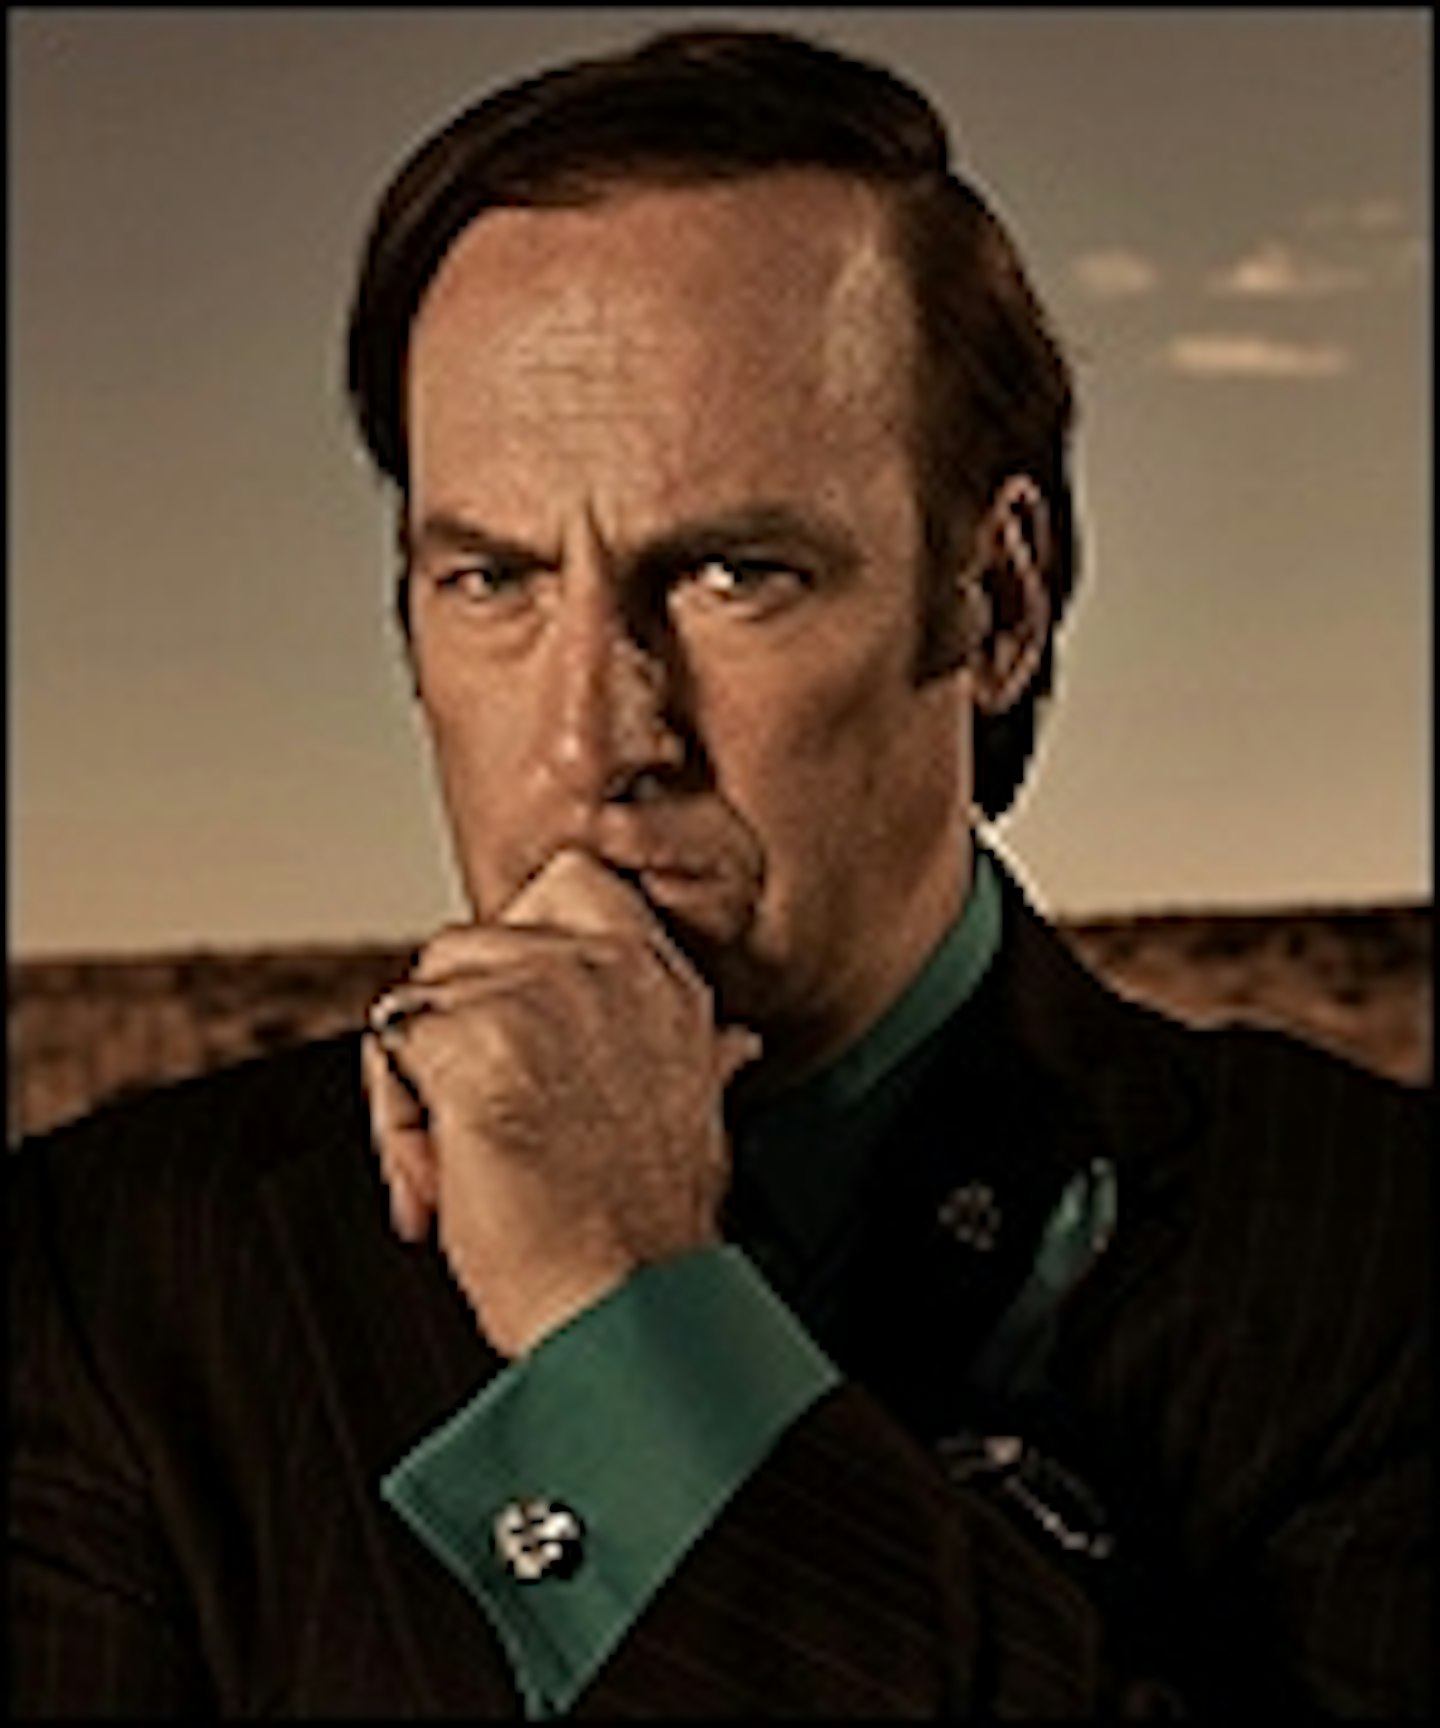 Better Call Saul Features 'Flexible' Timeline